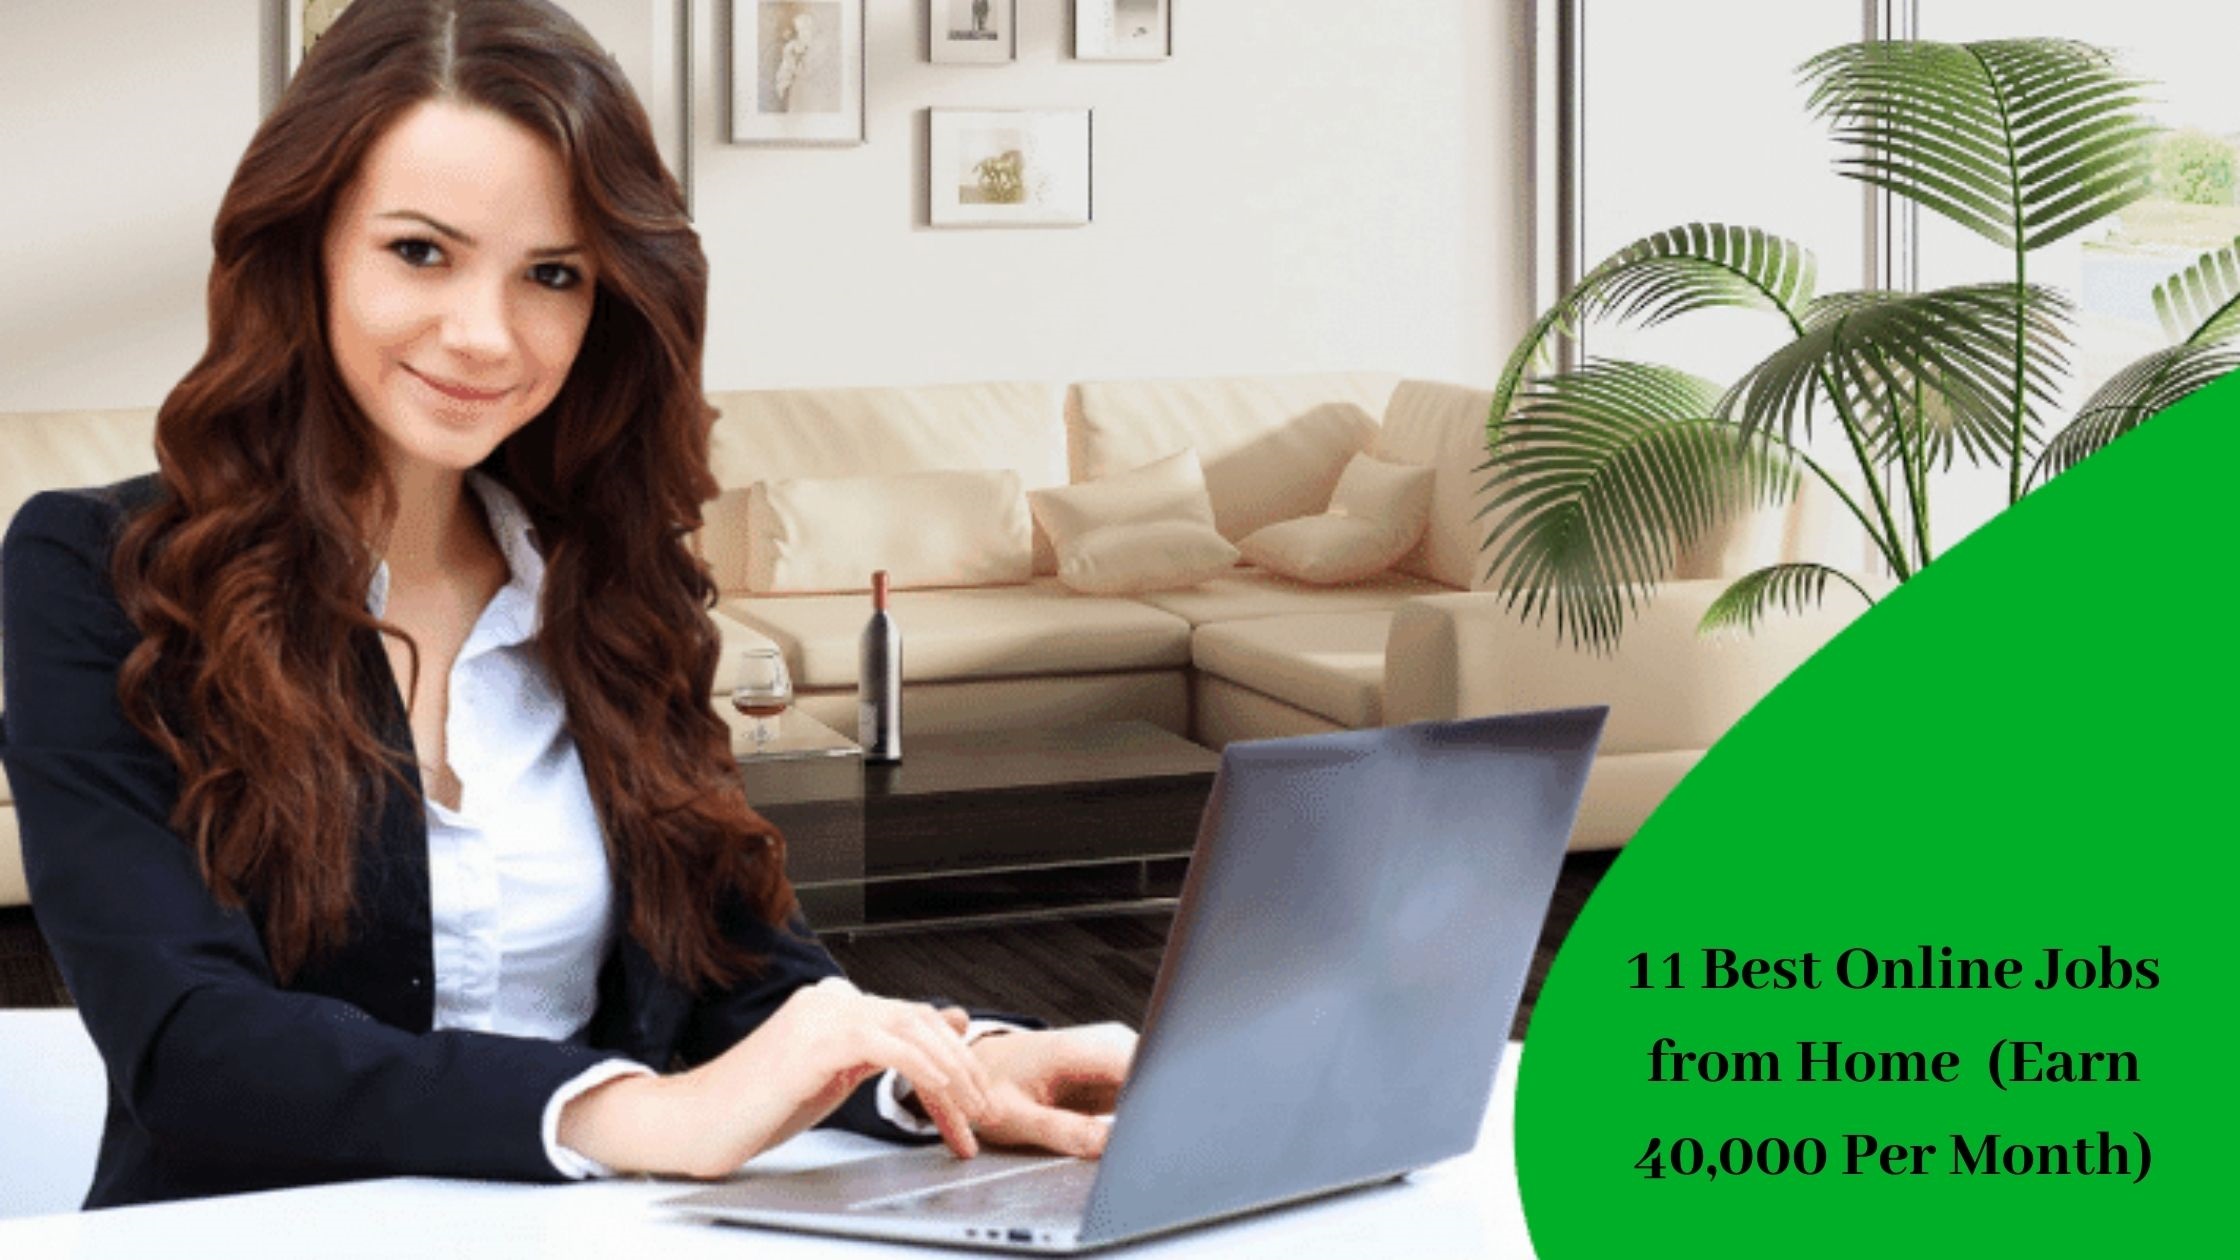 Online jobs from home